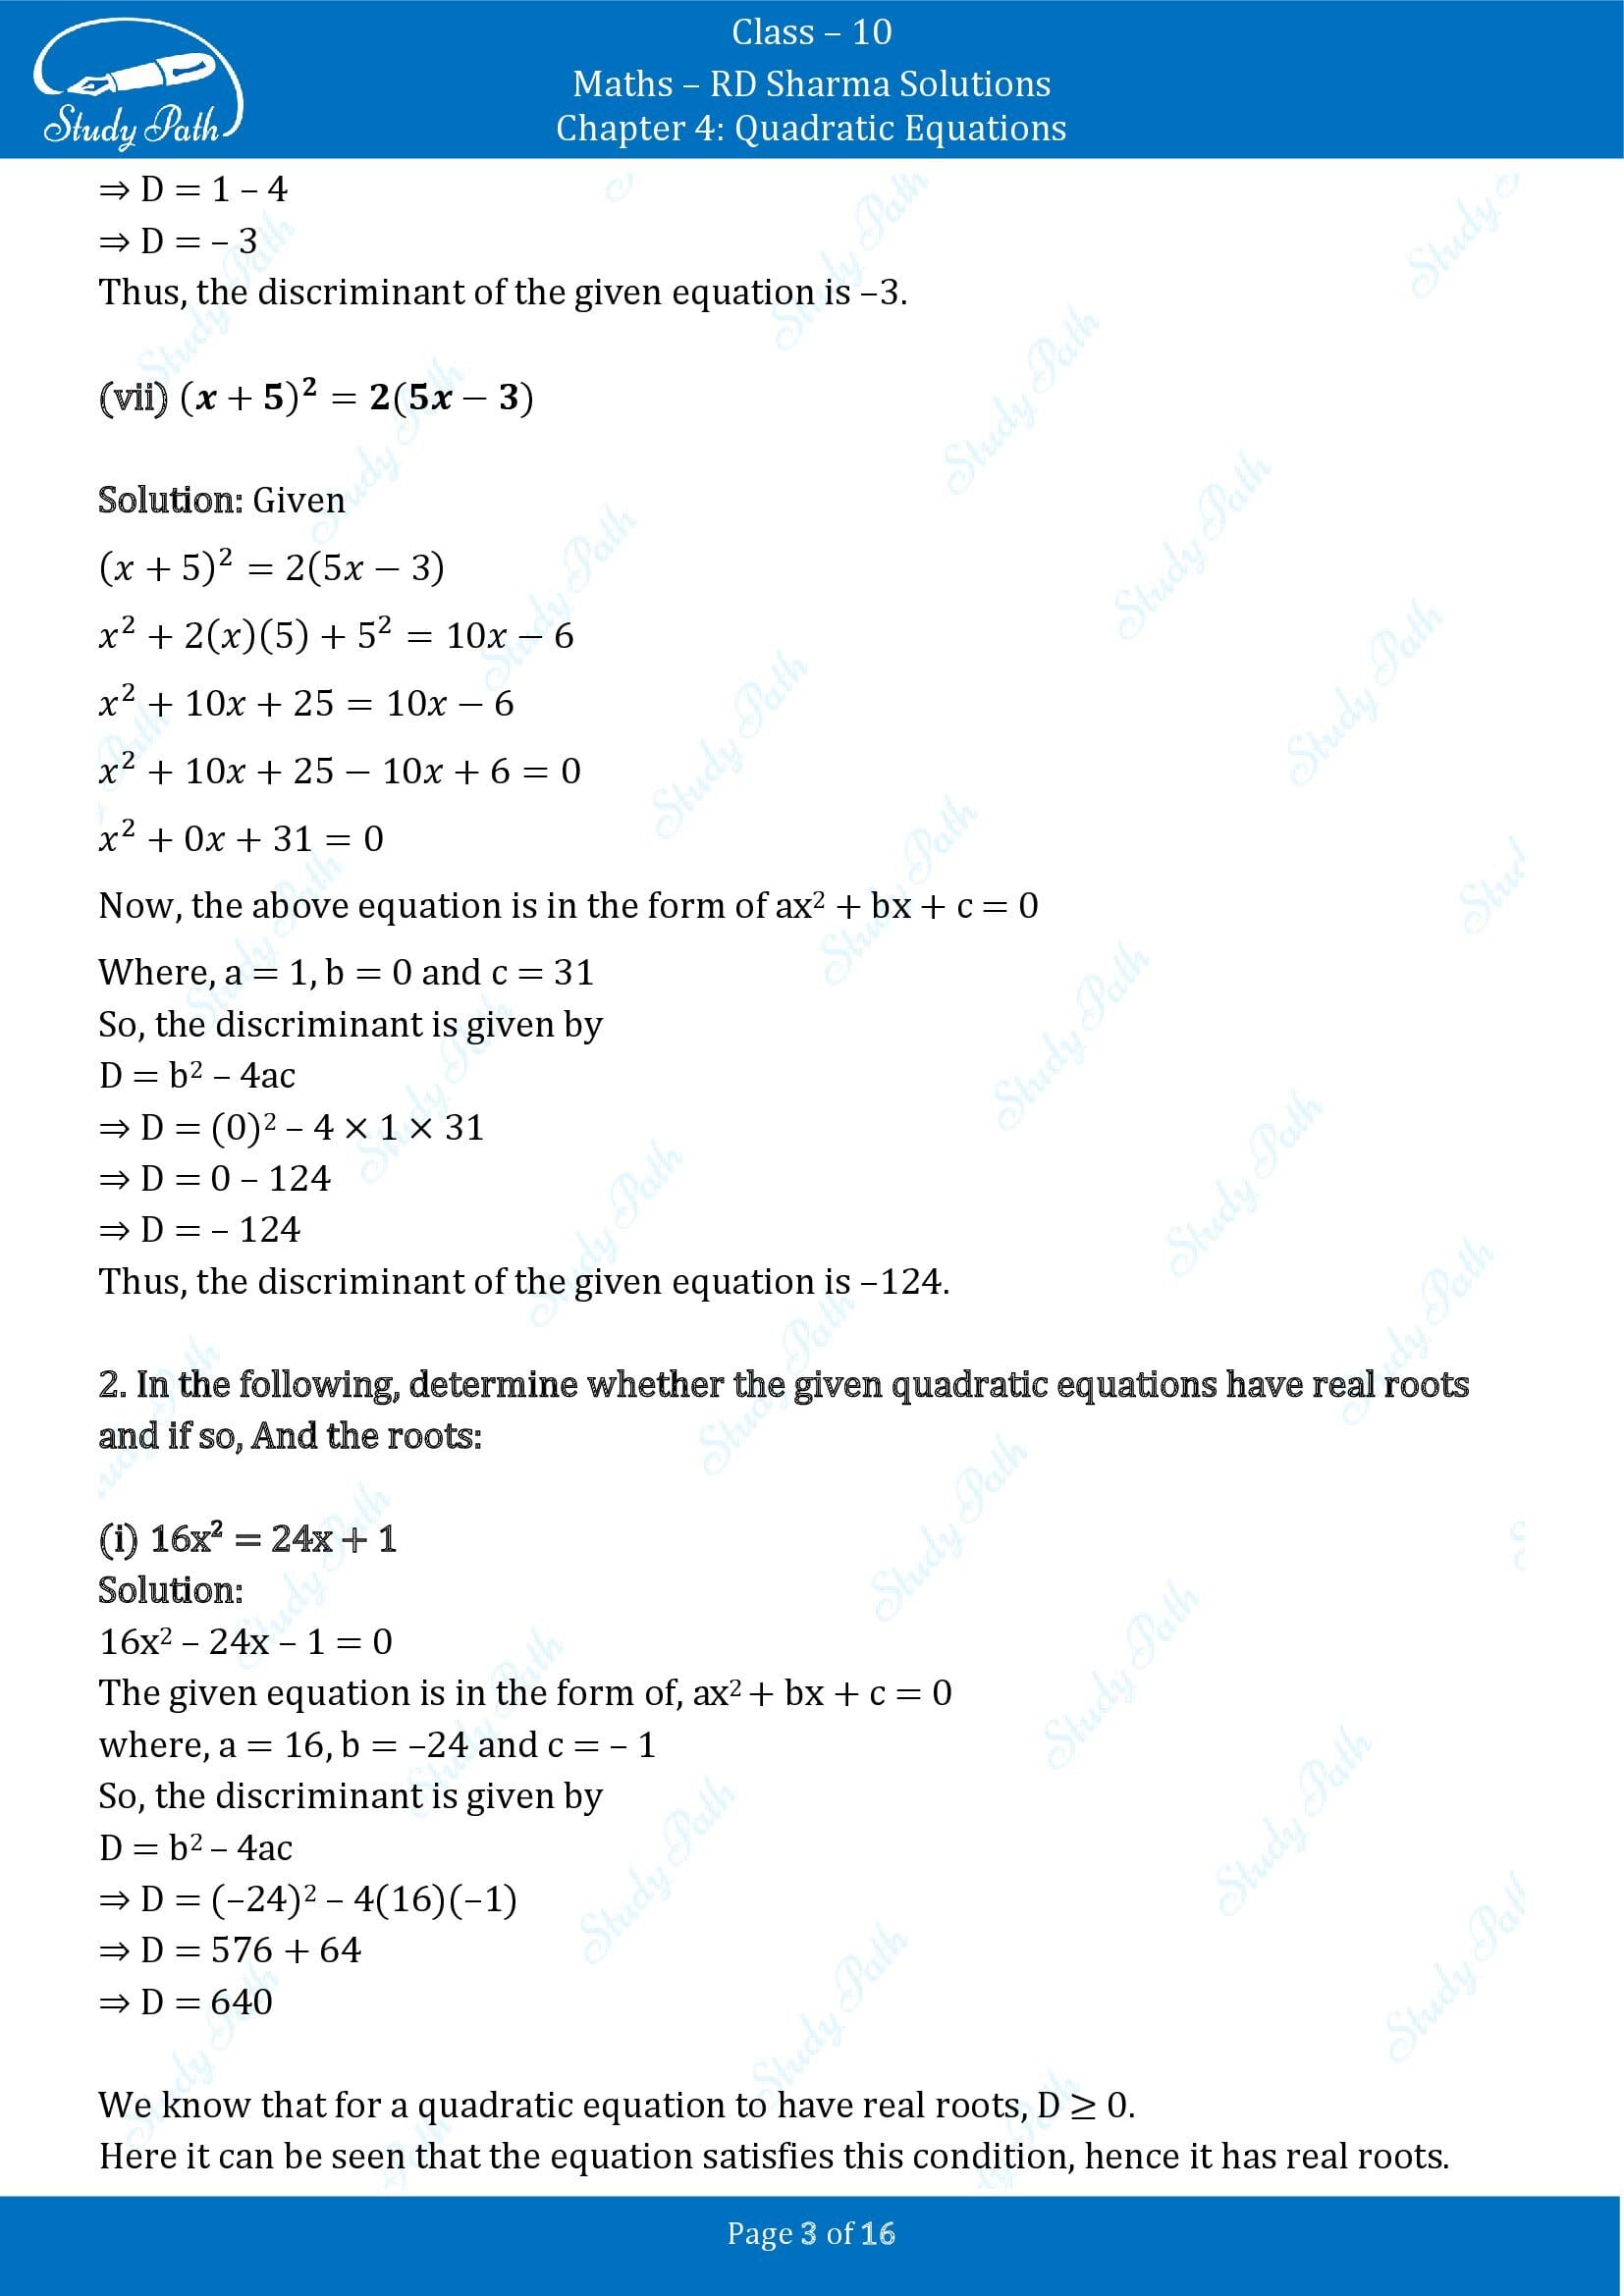 RD Sharma Solutions Class 10 Chapter 4 Quadratic Equations Exercise 4.5 00003